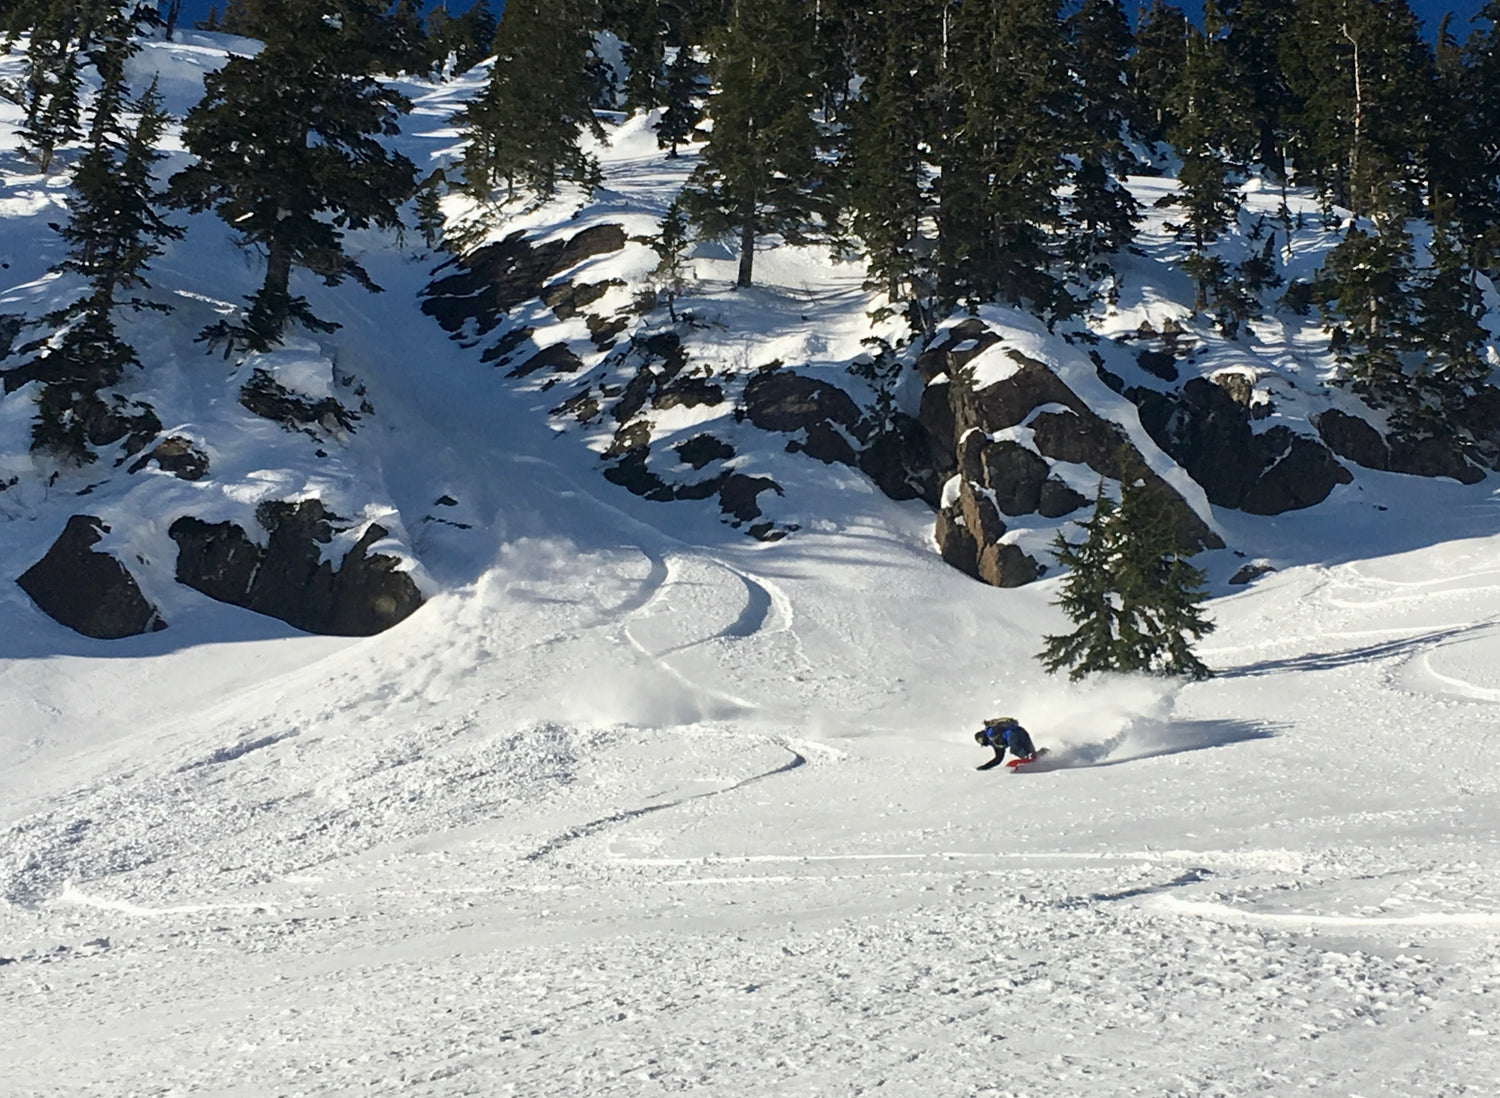 A splitboarder making a deep turn coming out of a rocky chute. During the Advanced Splitboard course we ride a variety of terrain!